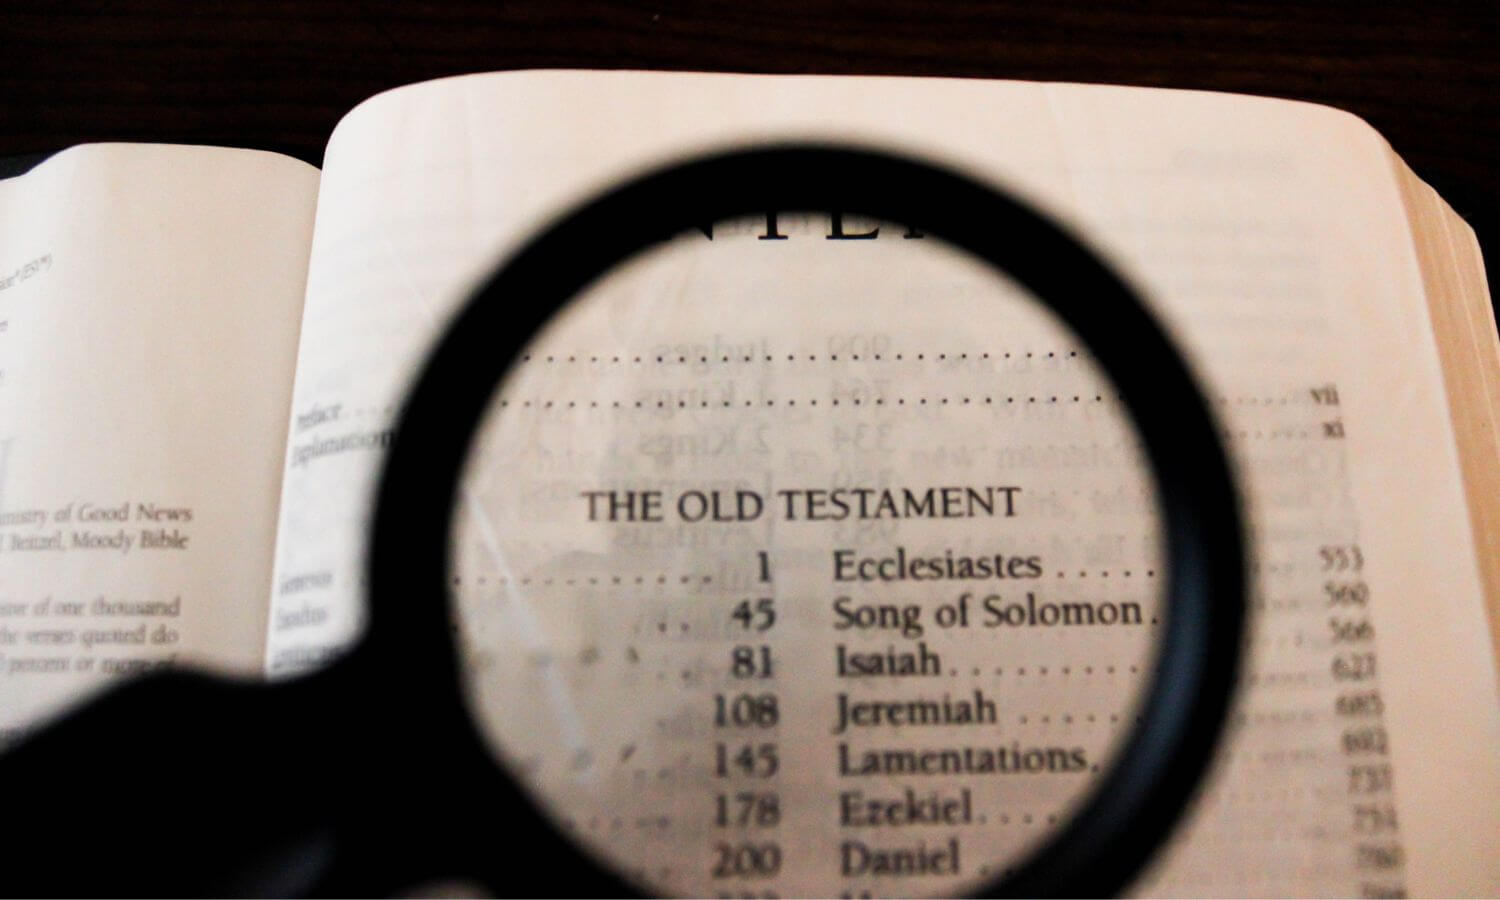 Someone researching what does god say about obedience in the bible?